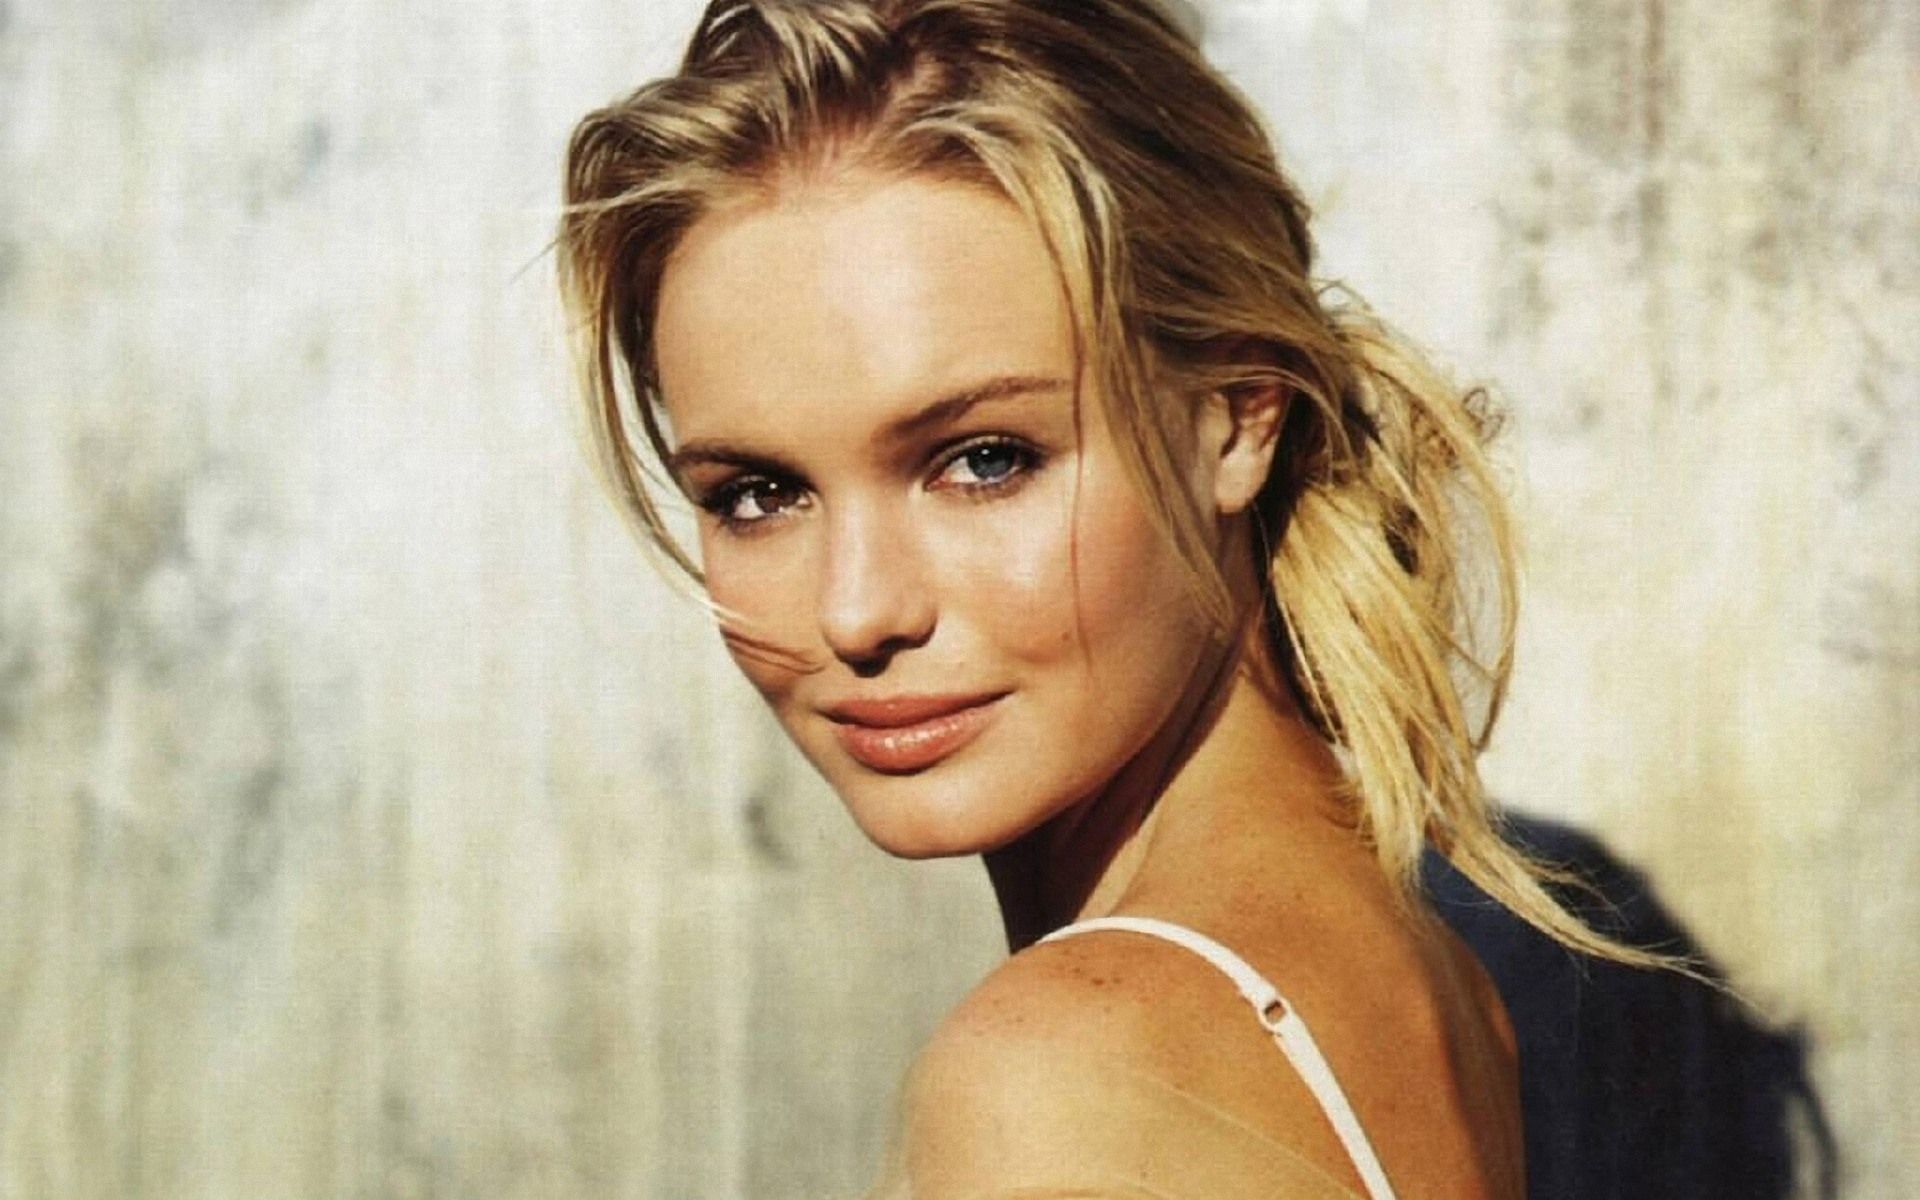 Kate Bosworth Wallpaper Image Photo Picture Background